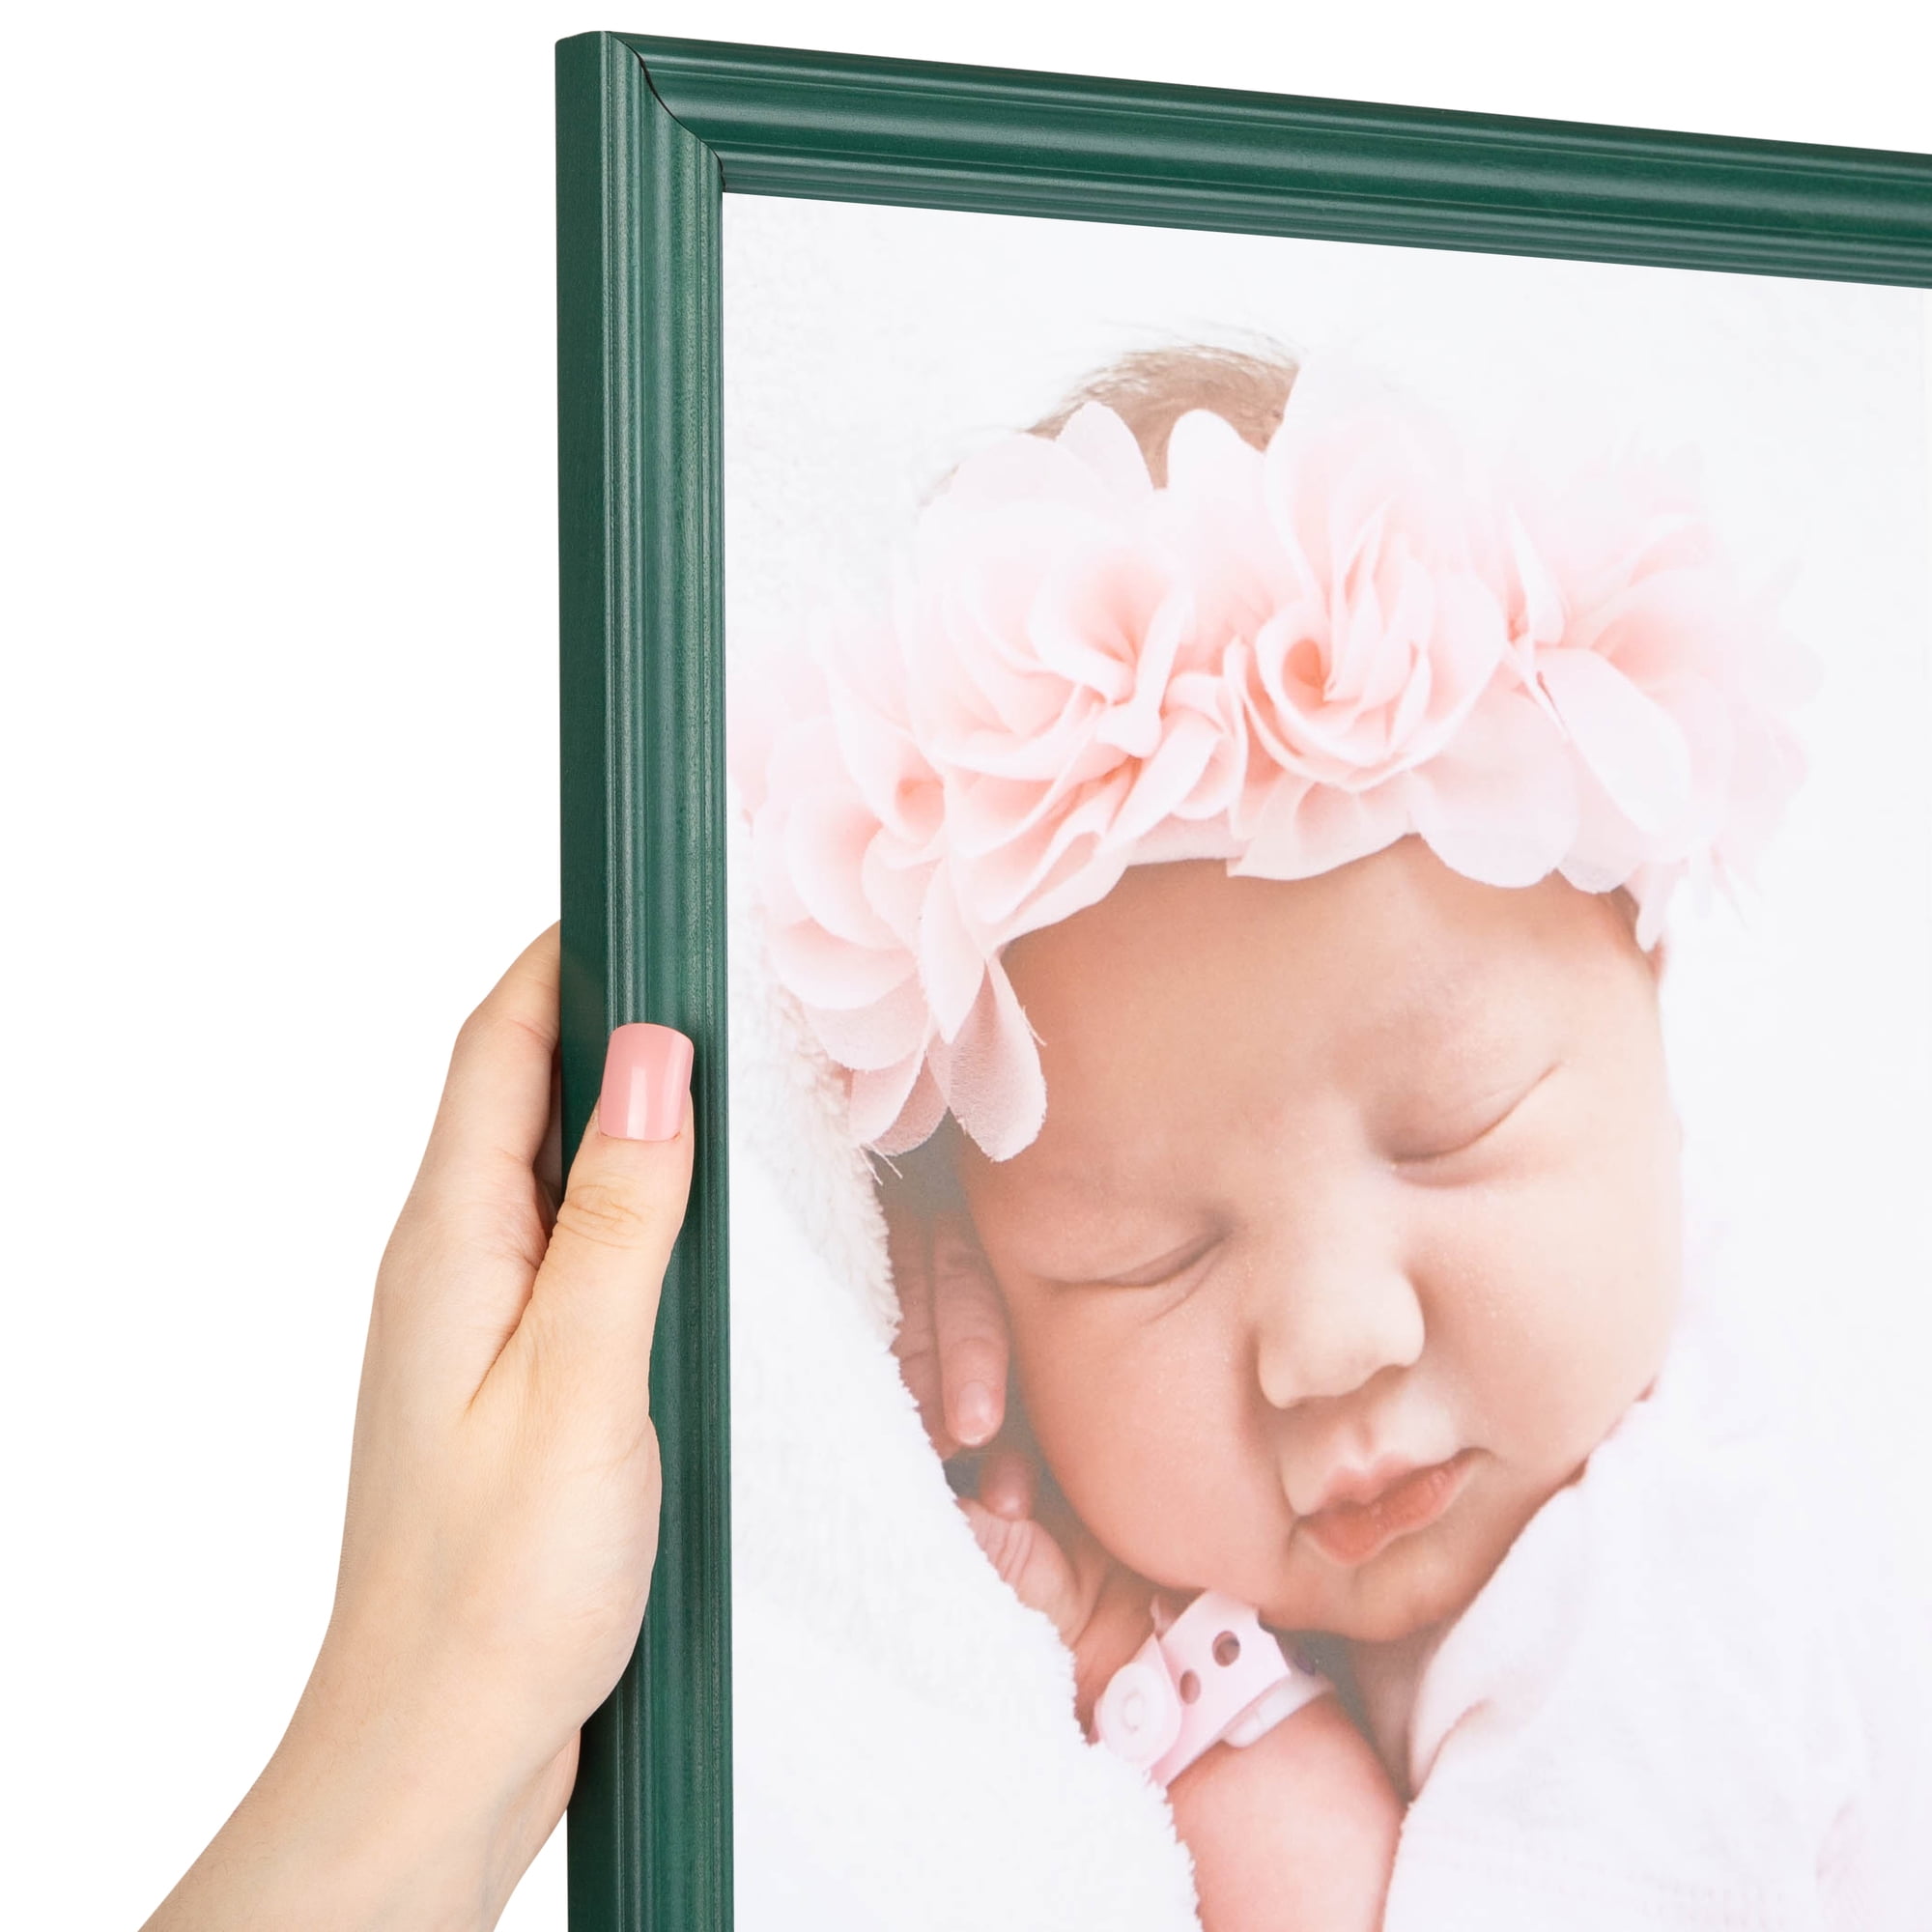  ArtToFrames 11x17 Inch Red Picture Frame, This 1.25 Custom  Wood Poster Frame is Dark Cherry Stain, for Your Art or Photos - Comes with  Regular Glass, WOM0066-81375-YCHY-11x17